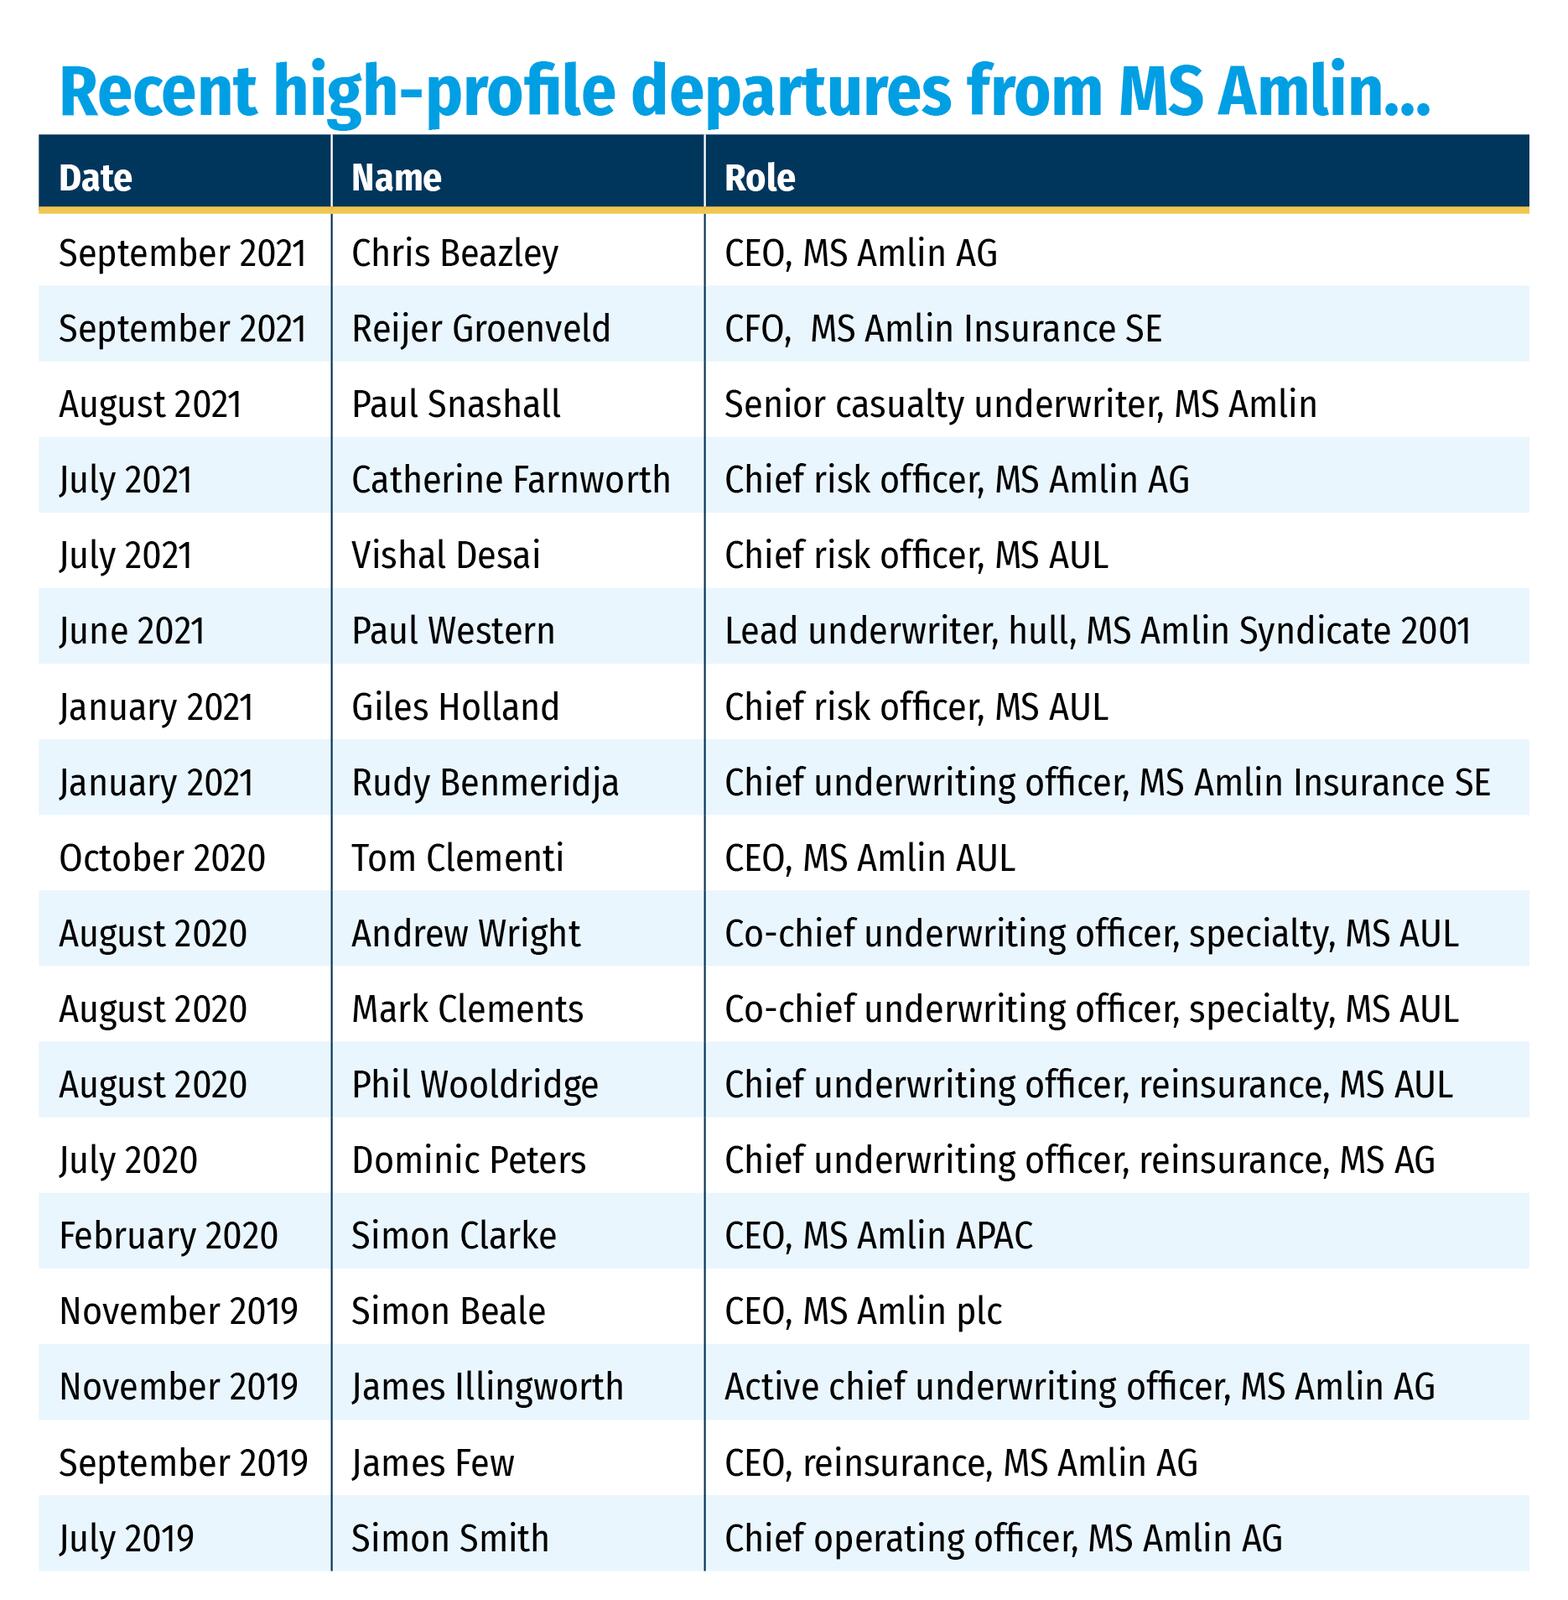 Recent high-profile departures from MS Amlin...